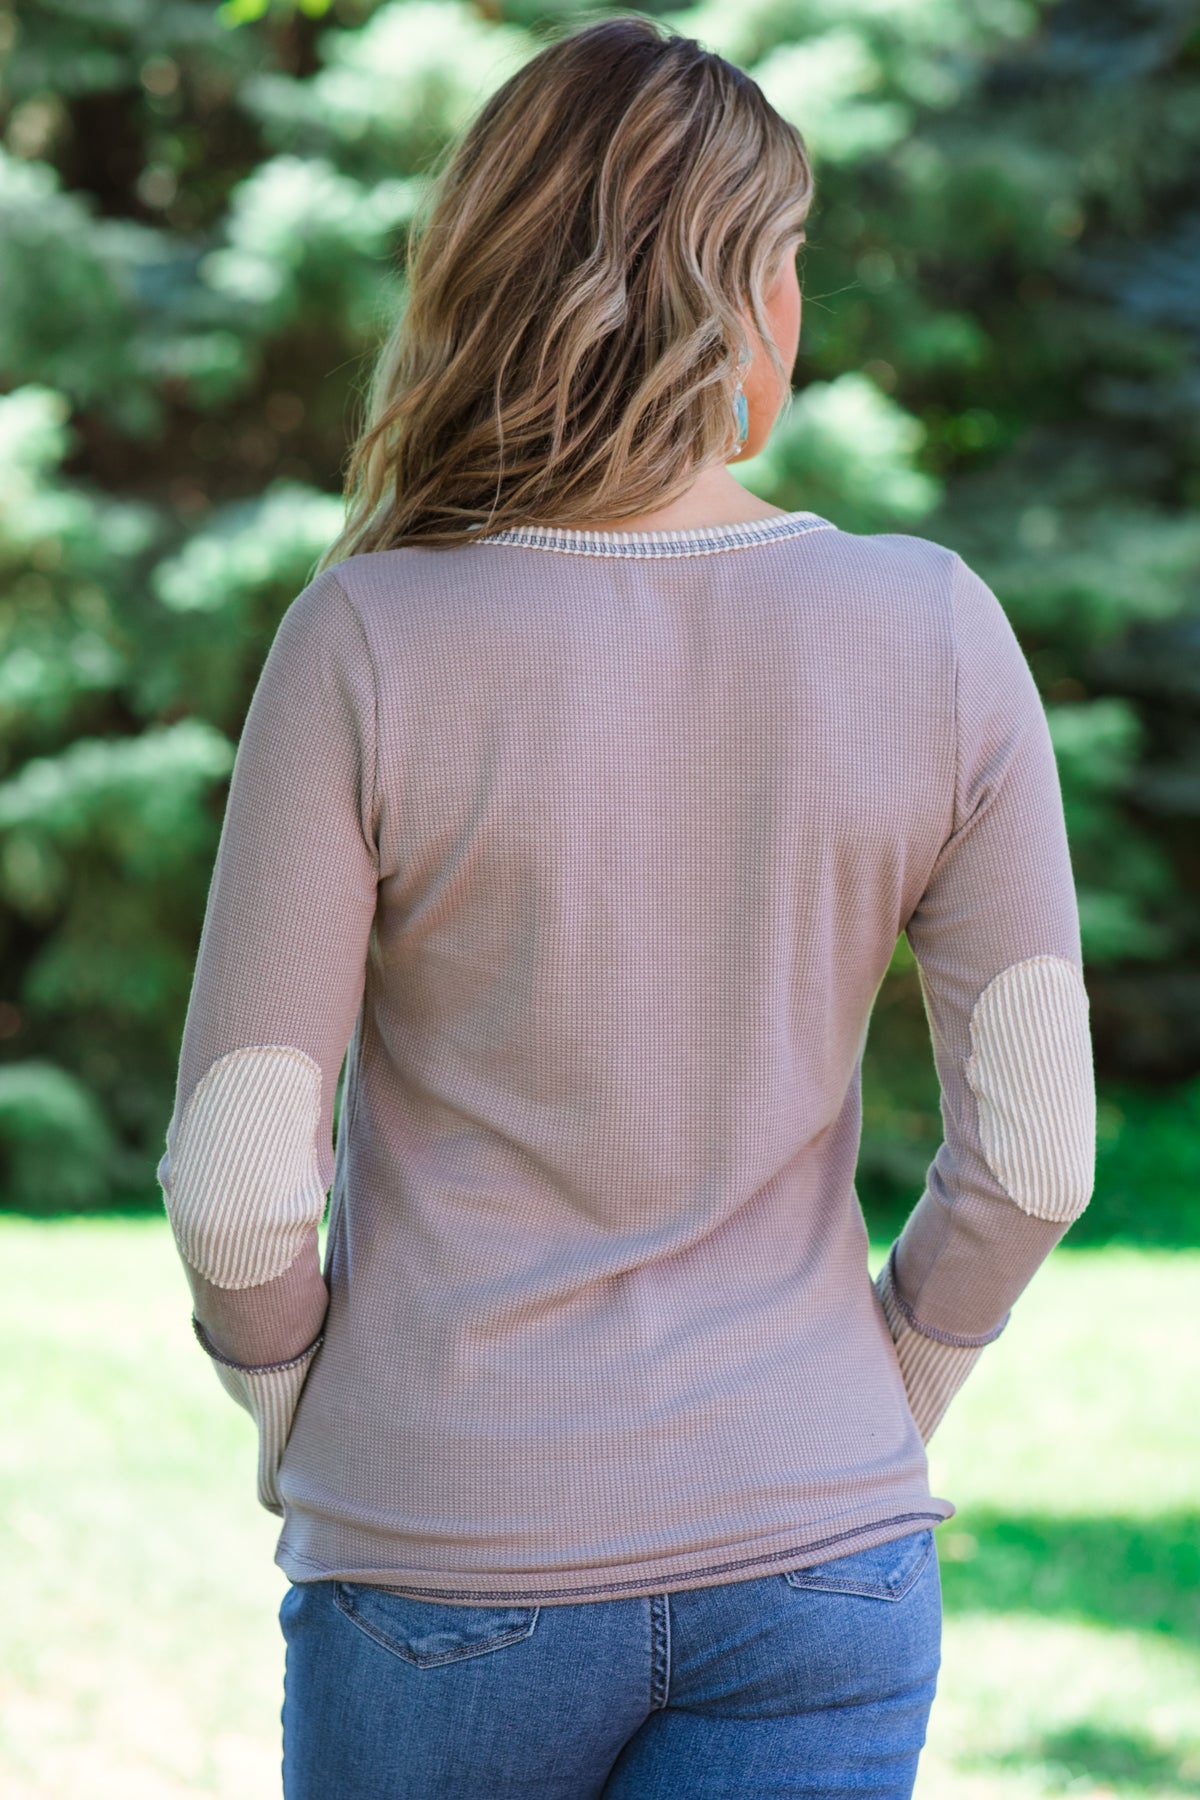 Mocha Top With Elbow Patches - Filly Flair